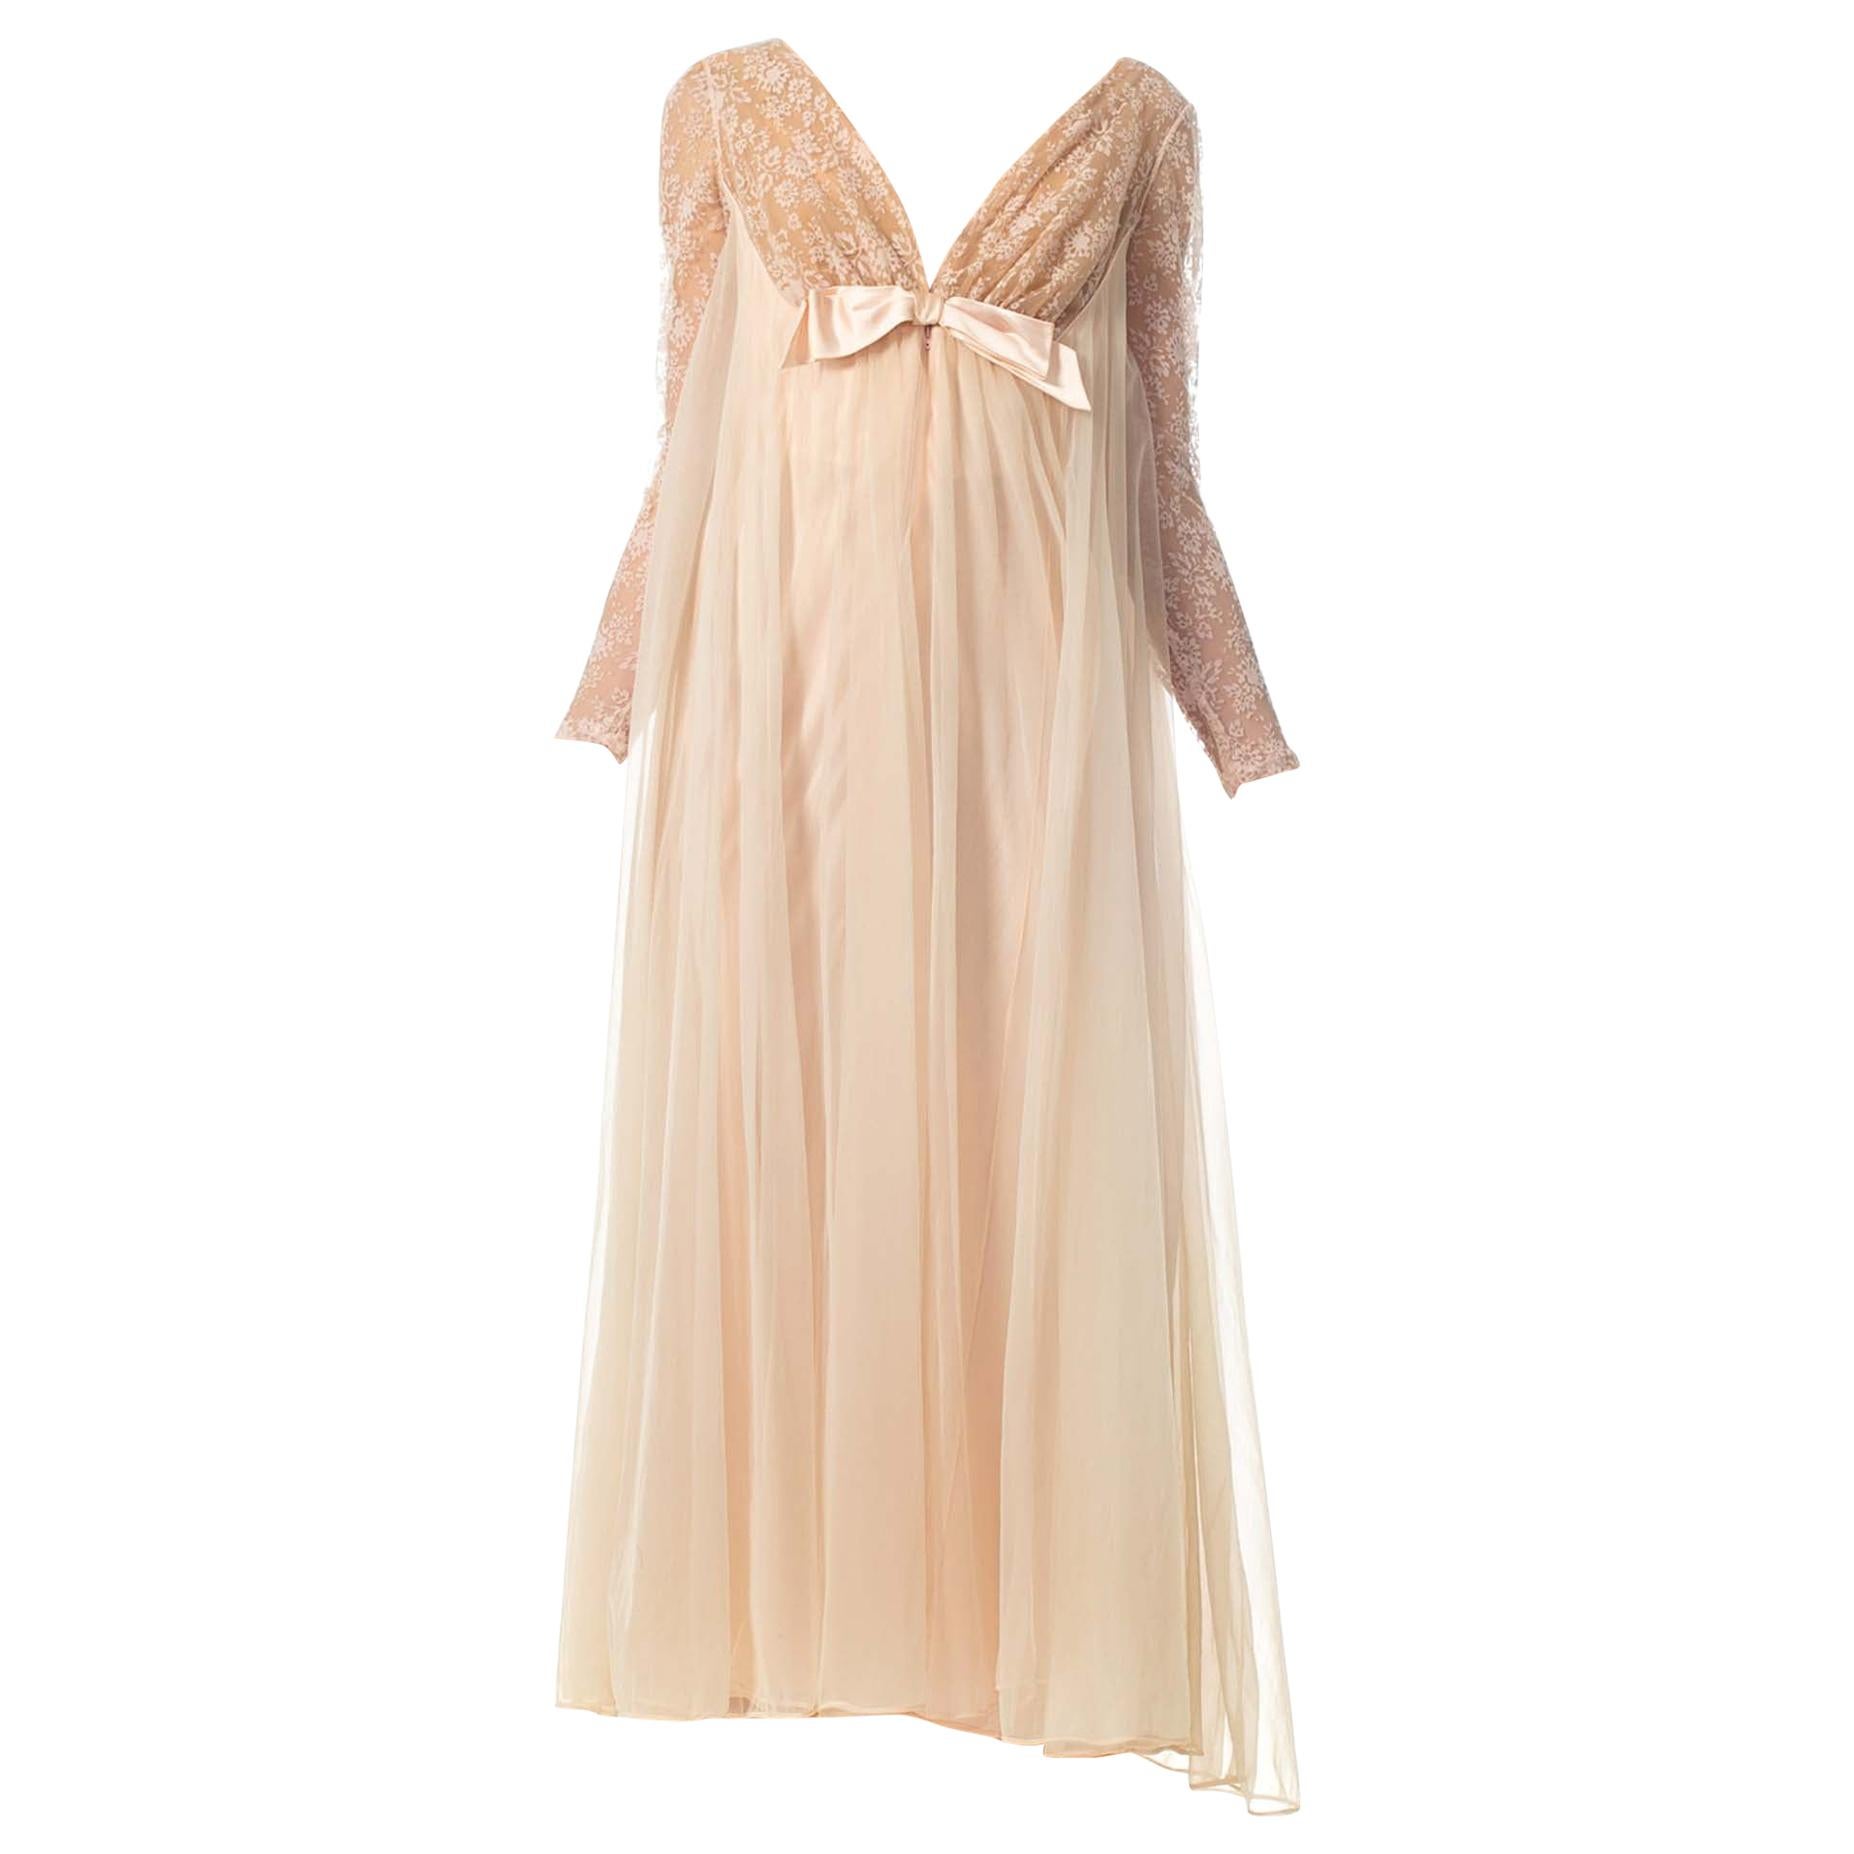 1960S Nude Nylon Chiffon Jersey Romantic Negligee House Dress With Sleeves